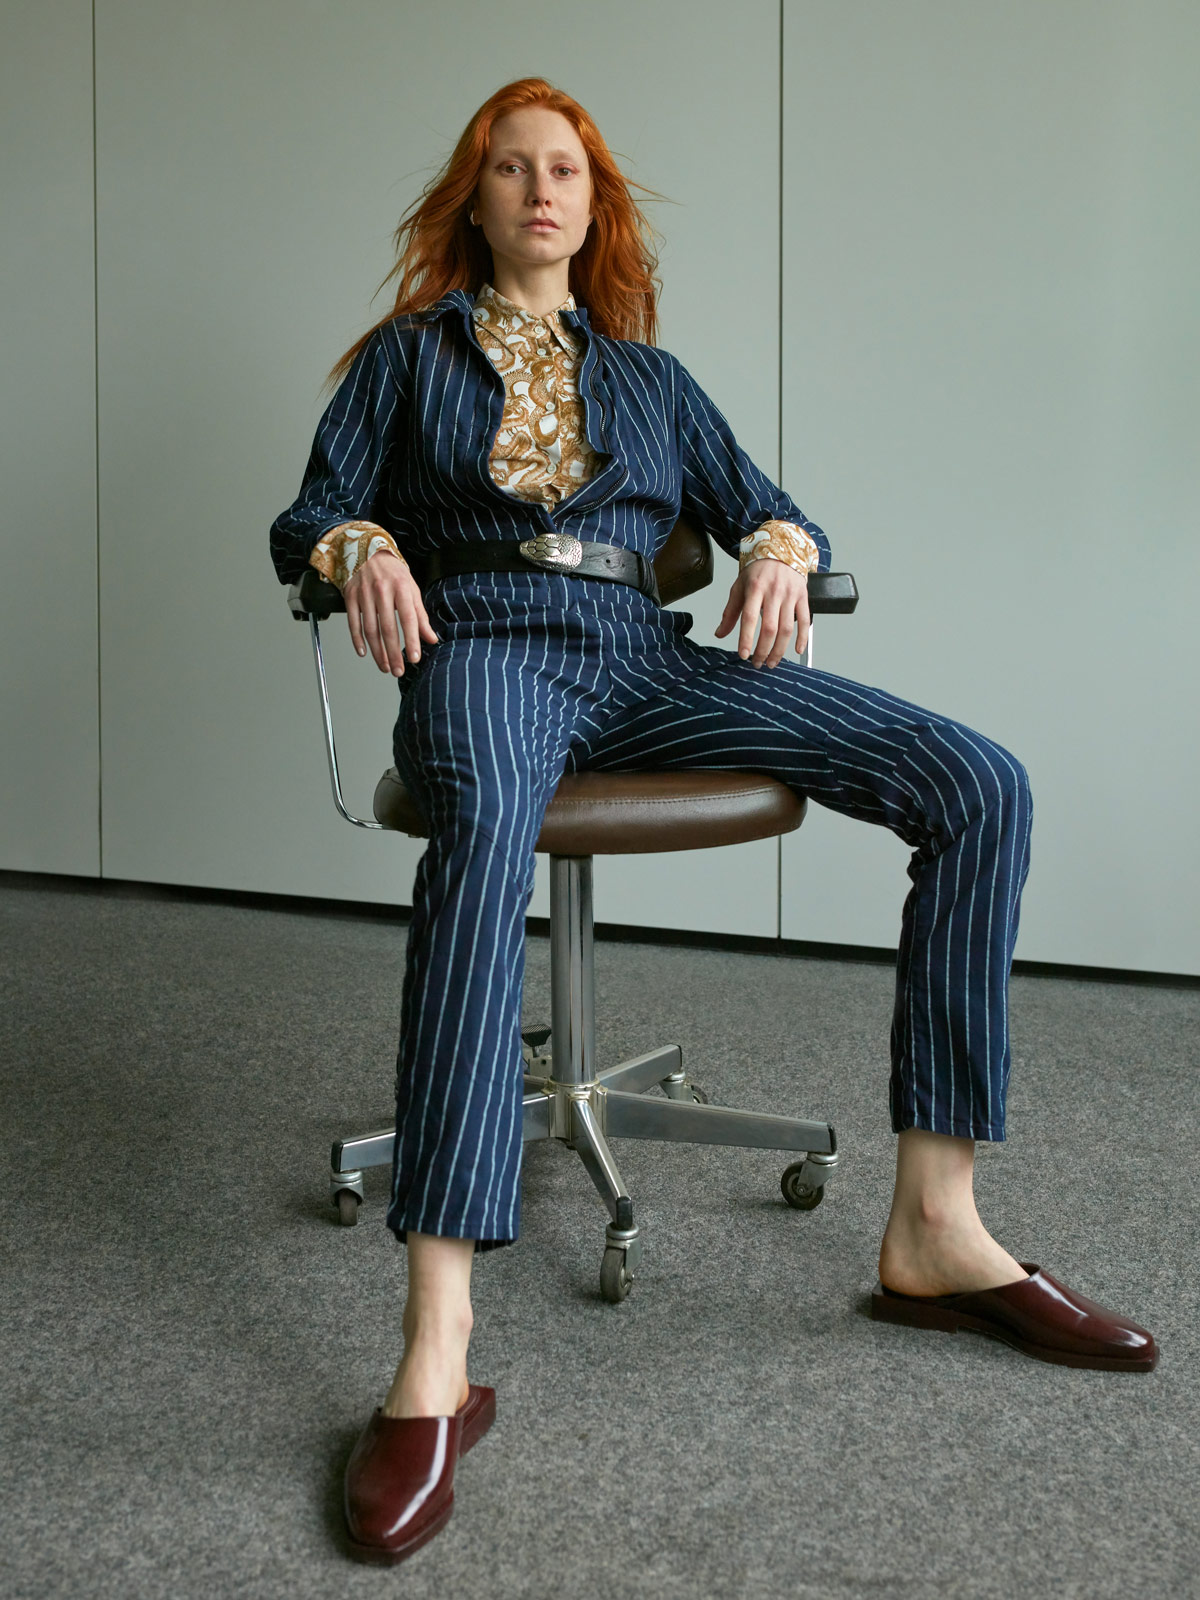 Jessica wears G-Star suit, Wunderkind blouse, Jil Sander slippers, and stylist's own belt.